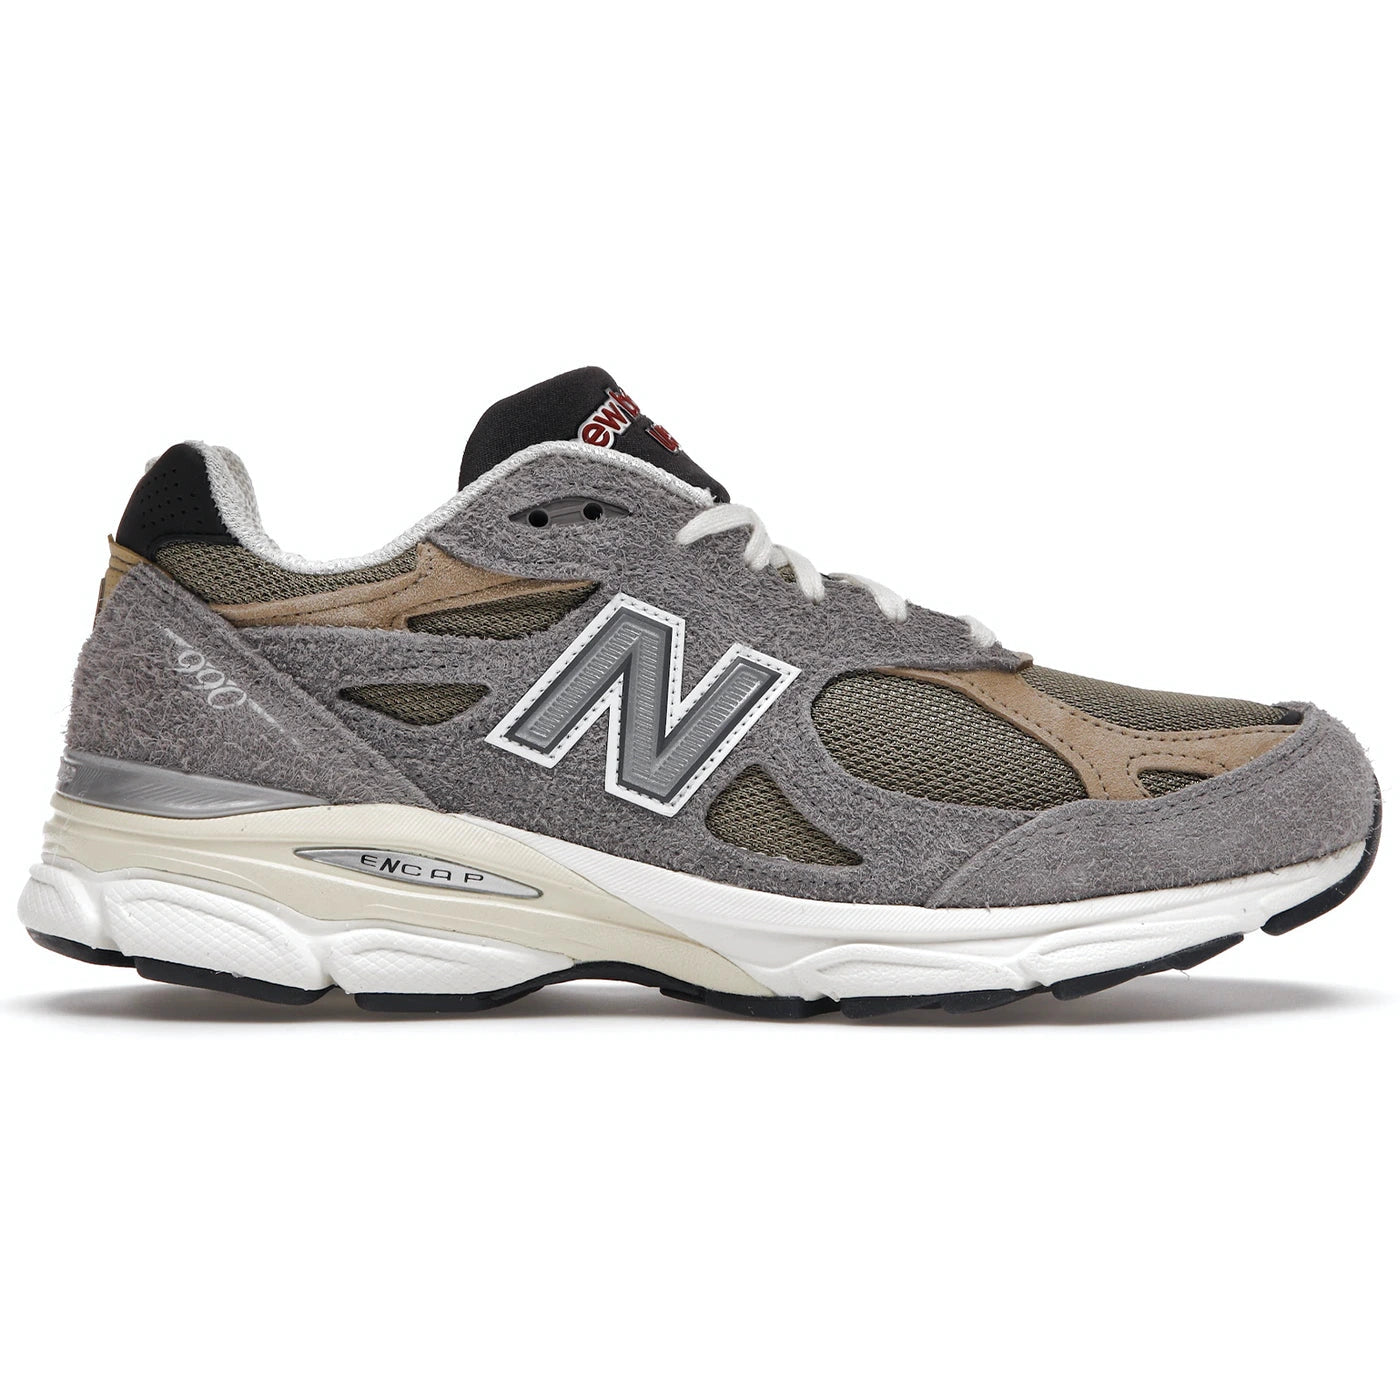 New Balance 990v3 'Marblehead' | Waves Never Die | New Balance | Sneakers